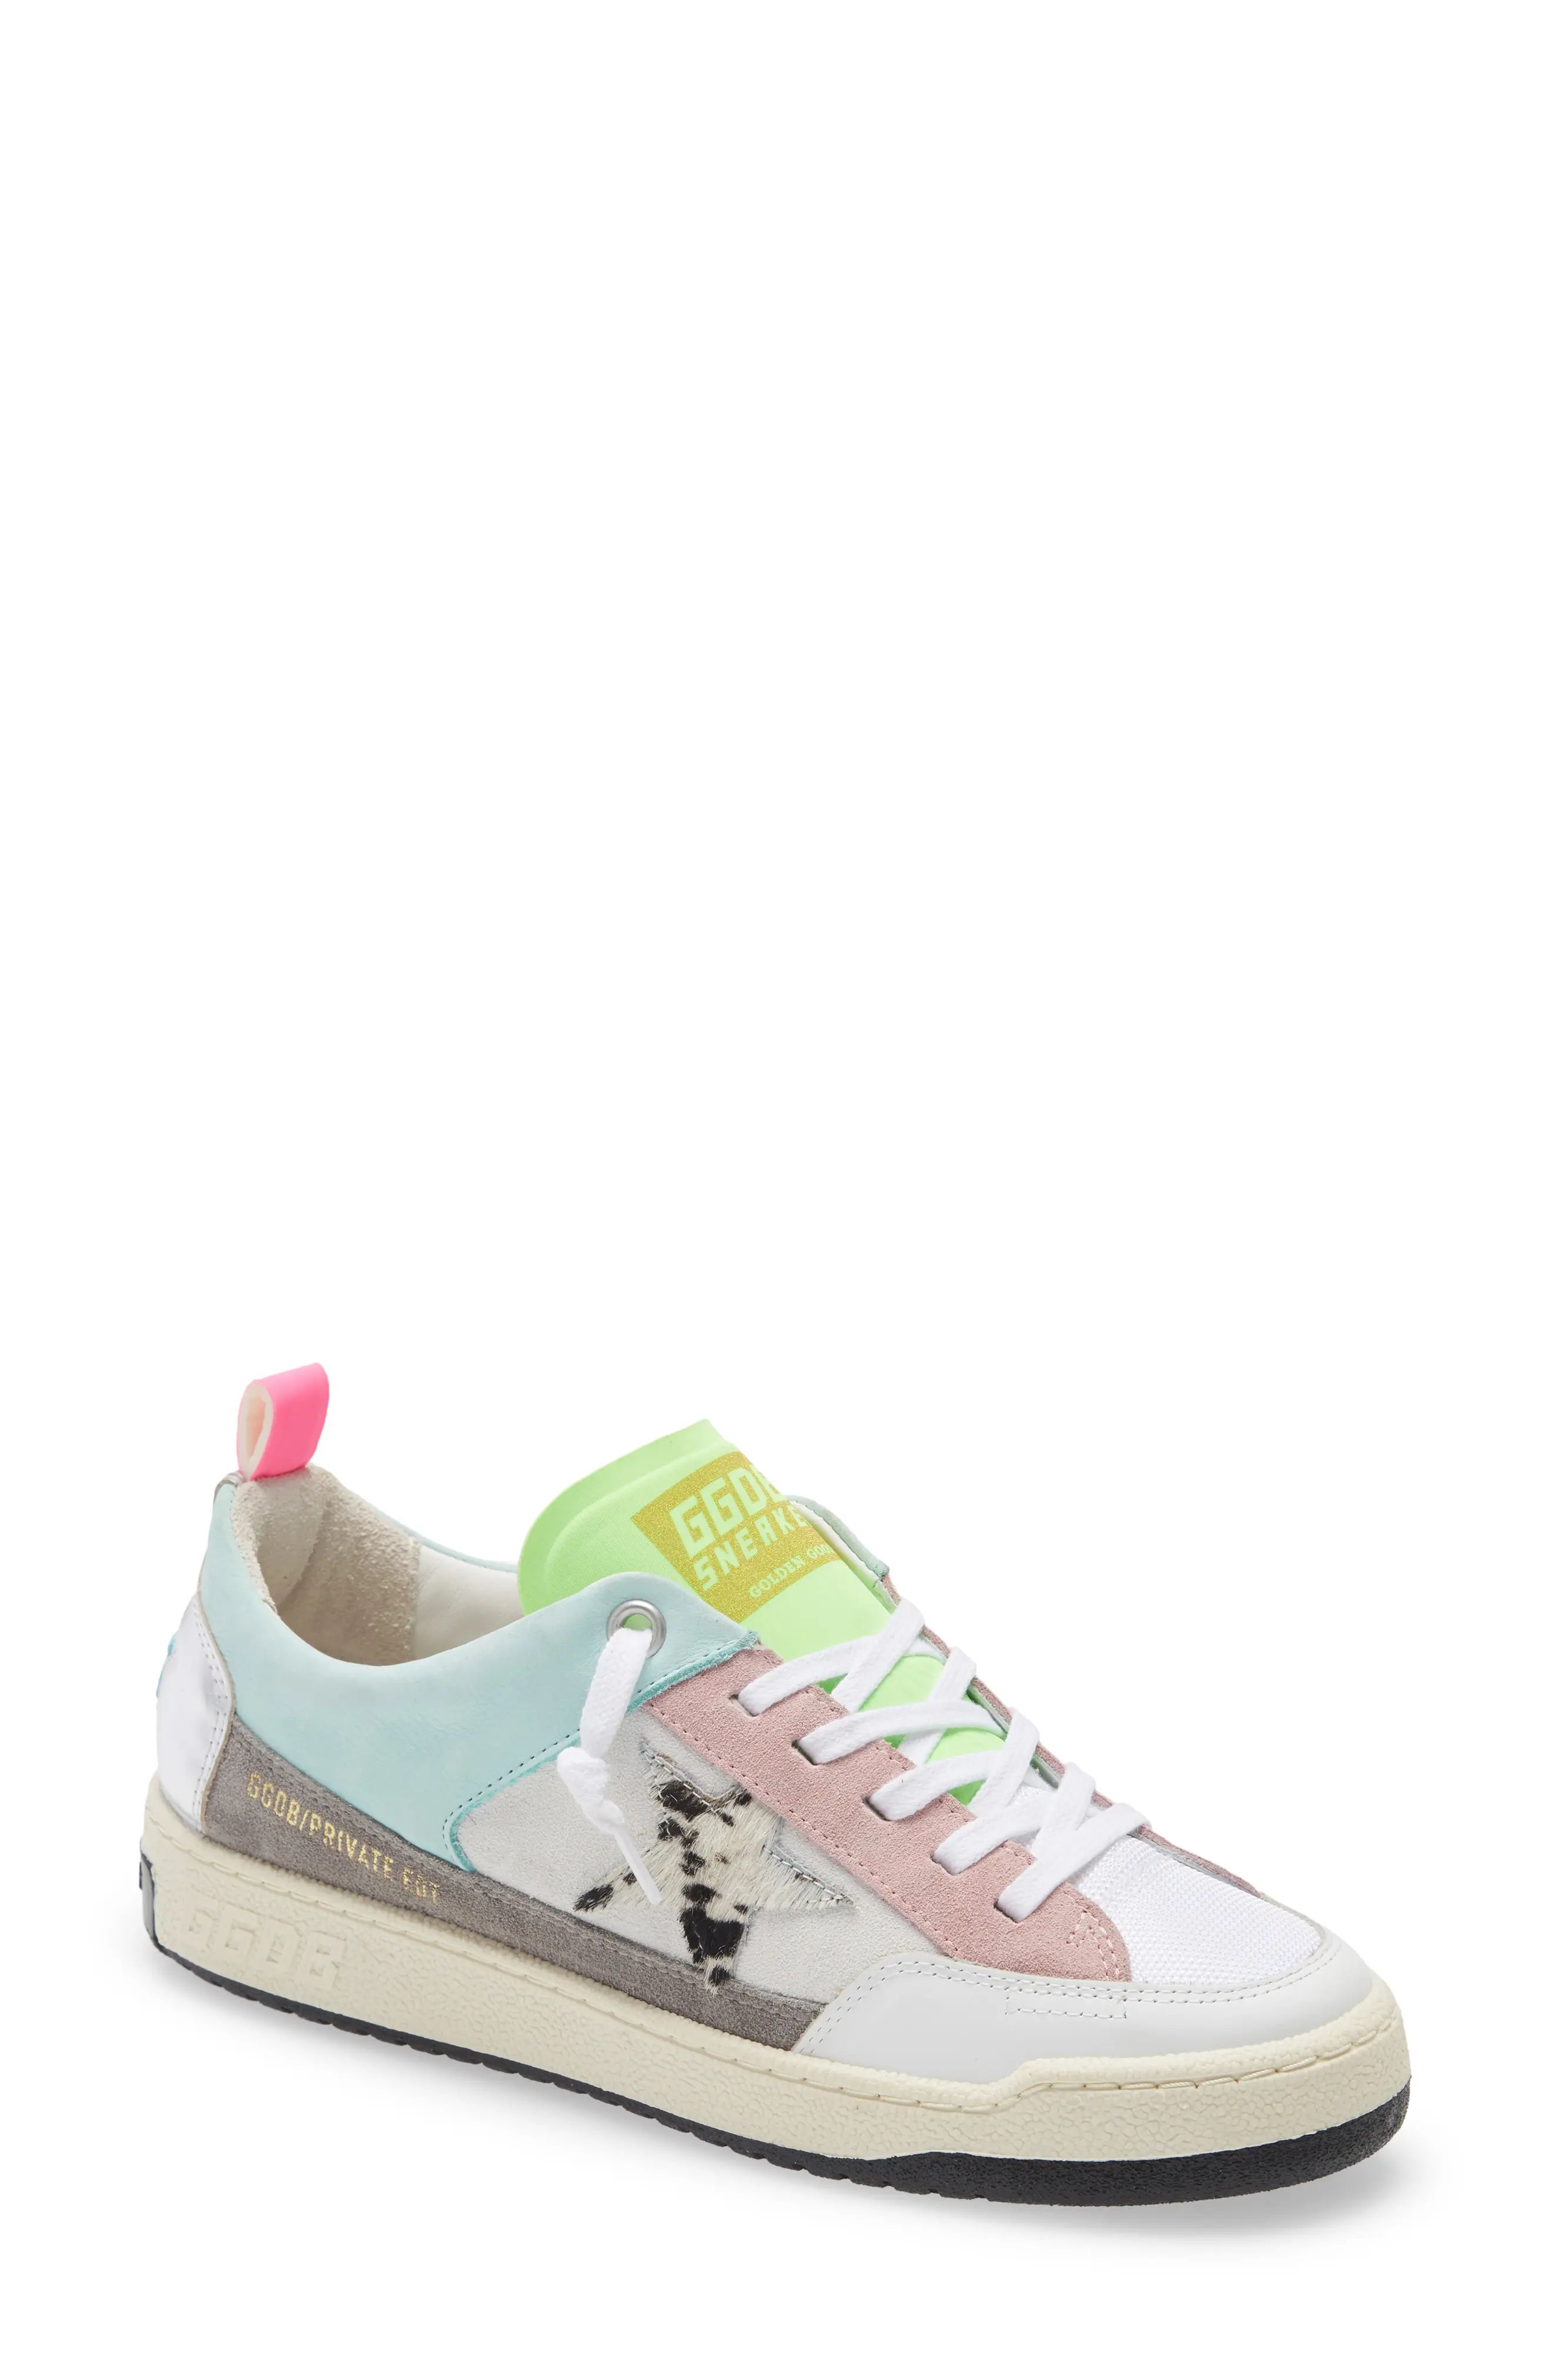 Golden Goose Yeah! Genuine Calf Hair Sneaker in Mint Leather And White at Nordstrom, Size 9Us | Nordstrom